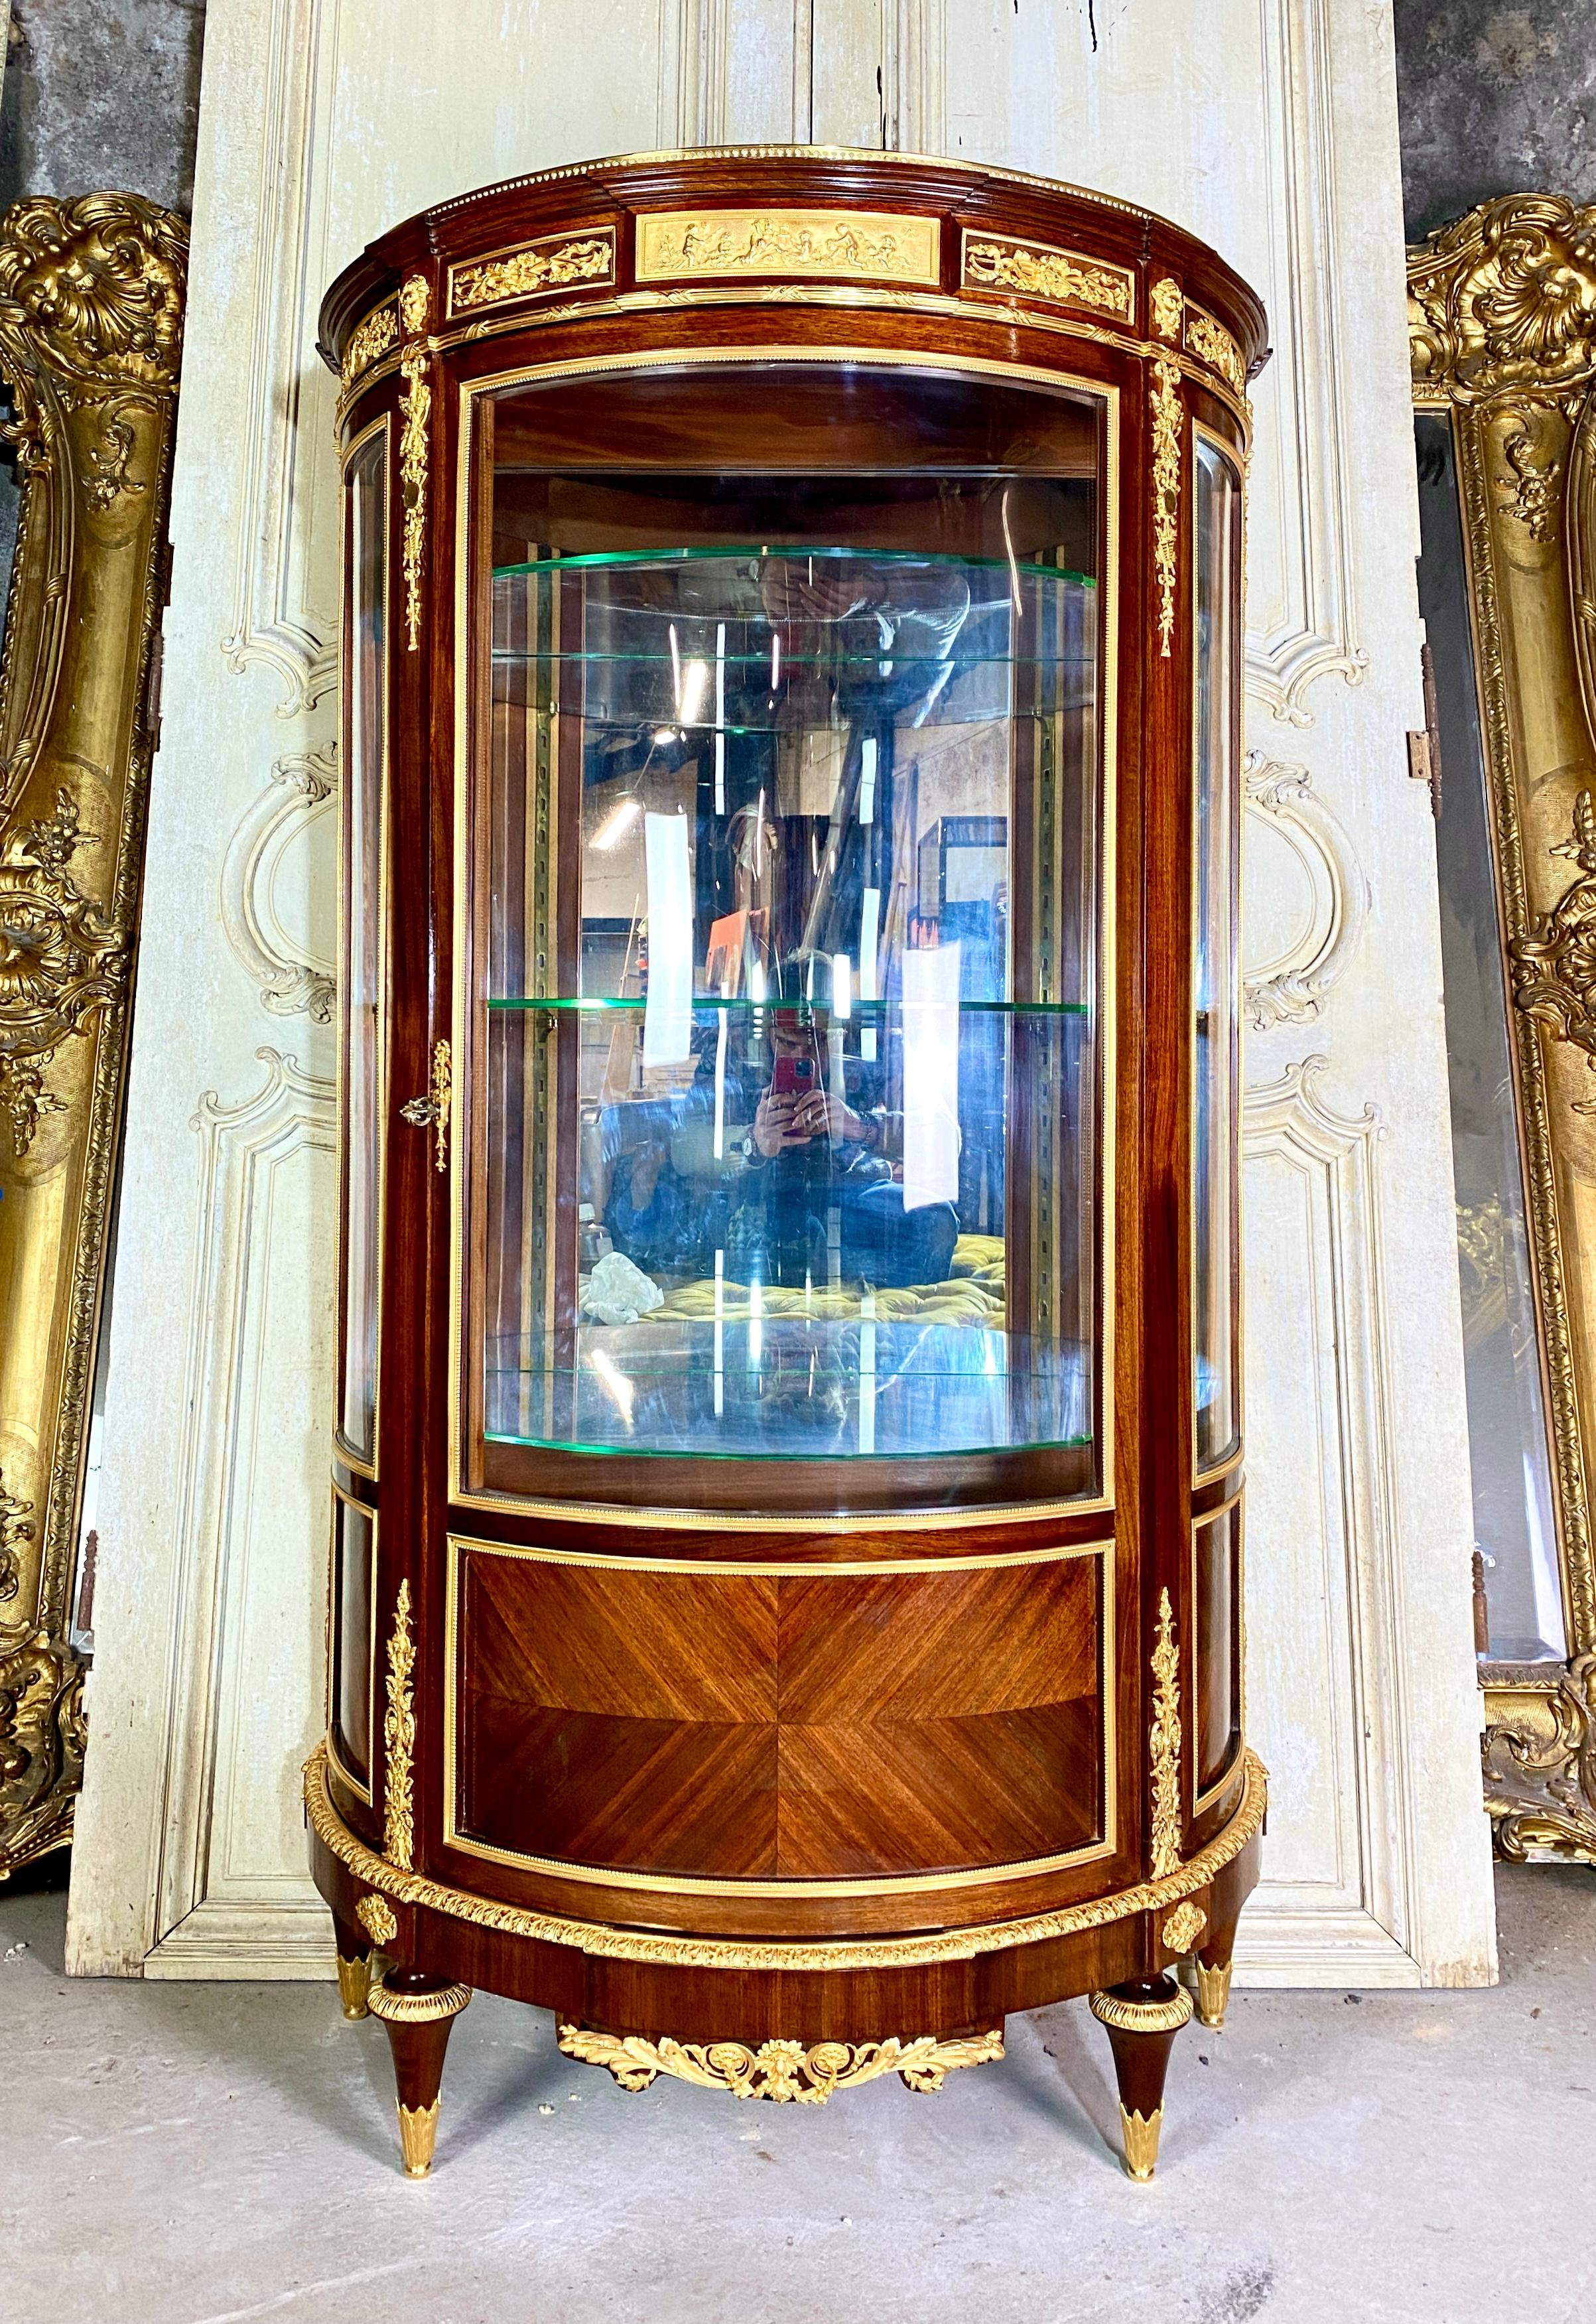 Mahogany half-moon-shaped showcase adorned with many finely chiseled and gilded bronzes with a bas-relief in the center representing a scene with puttis in the style of Clodion. It is made up of three curved panes and opens with a central door. It